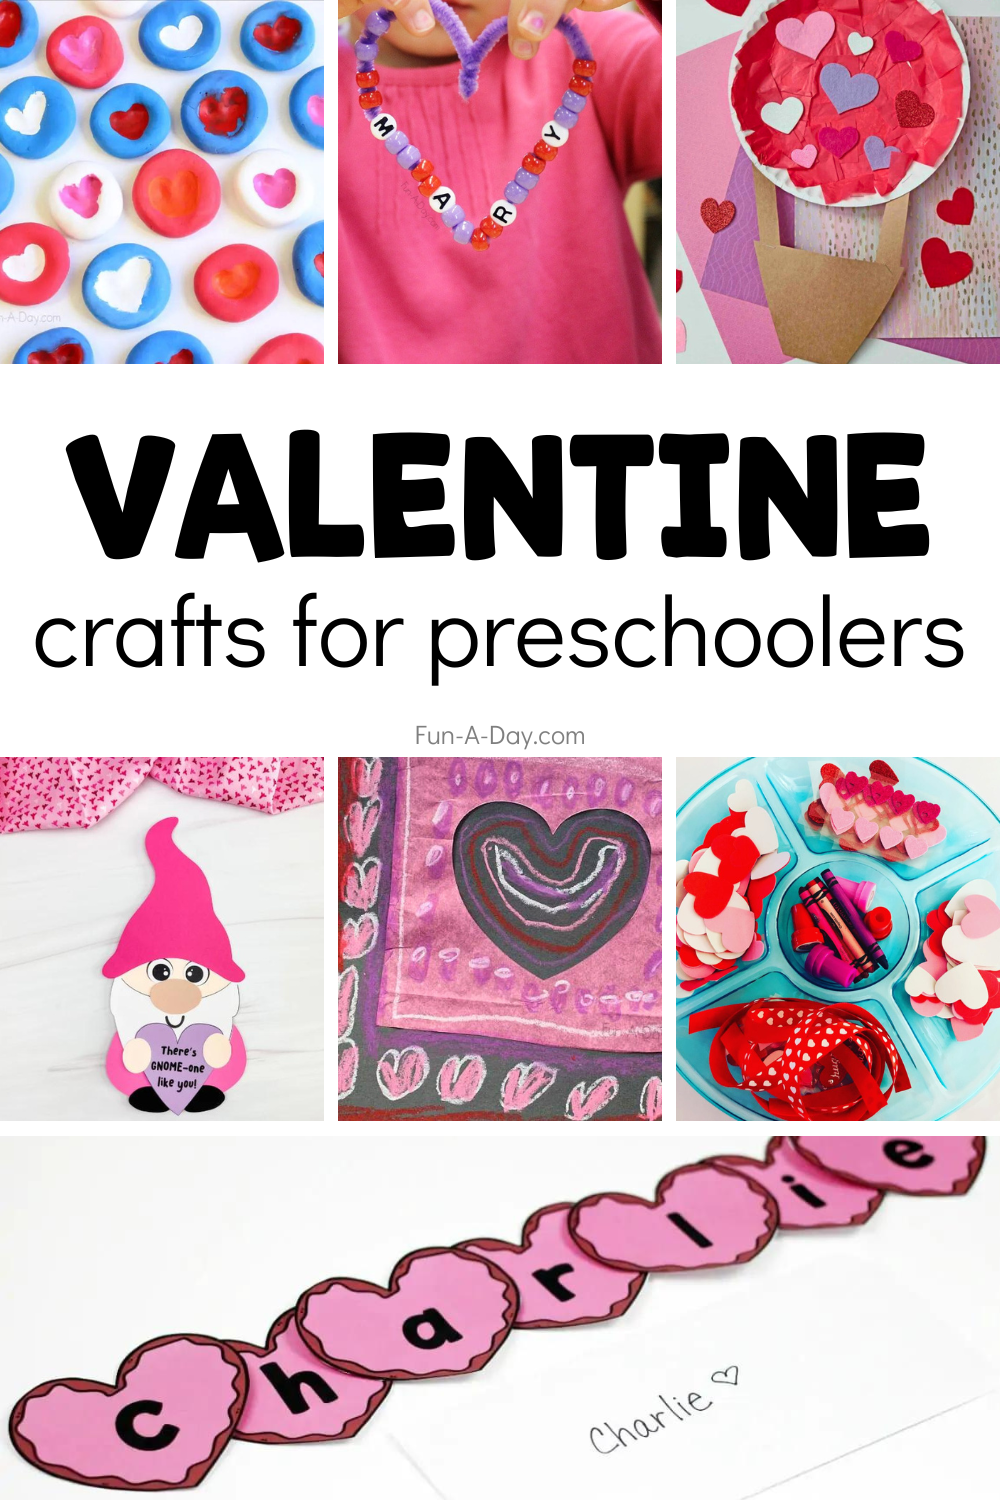 Seven Valentine's Day craft ideas for kids with text that reads valentine crafts for preschoolers.